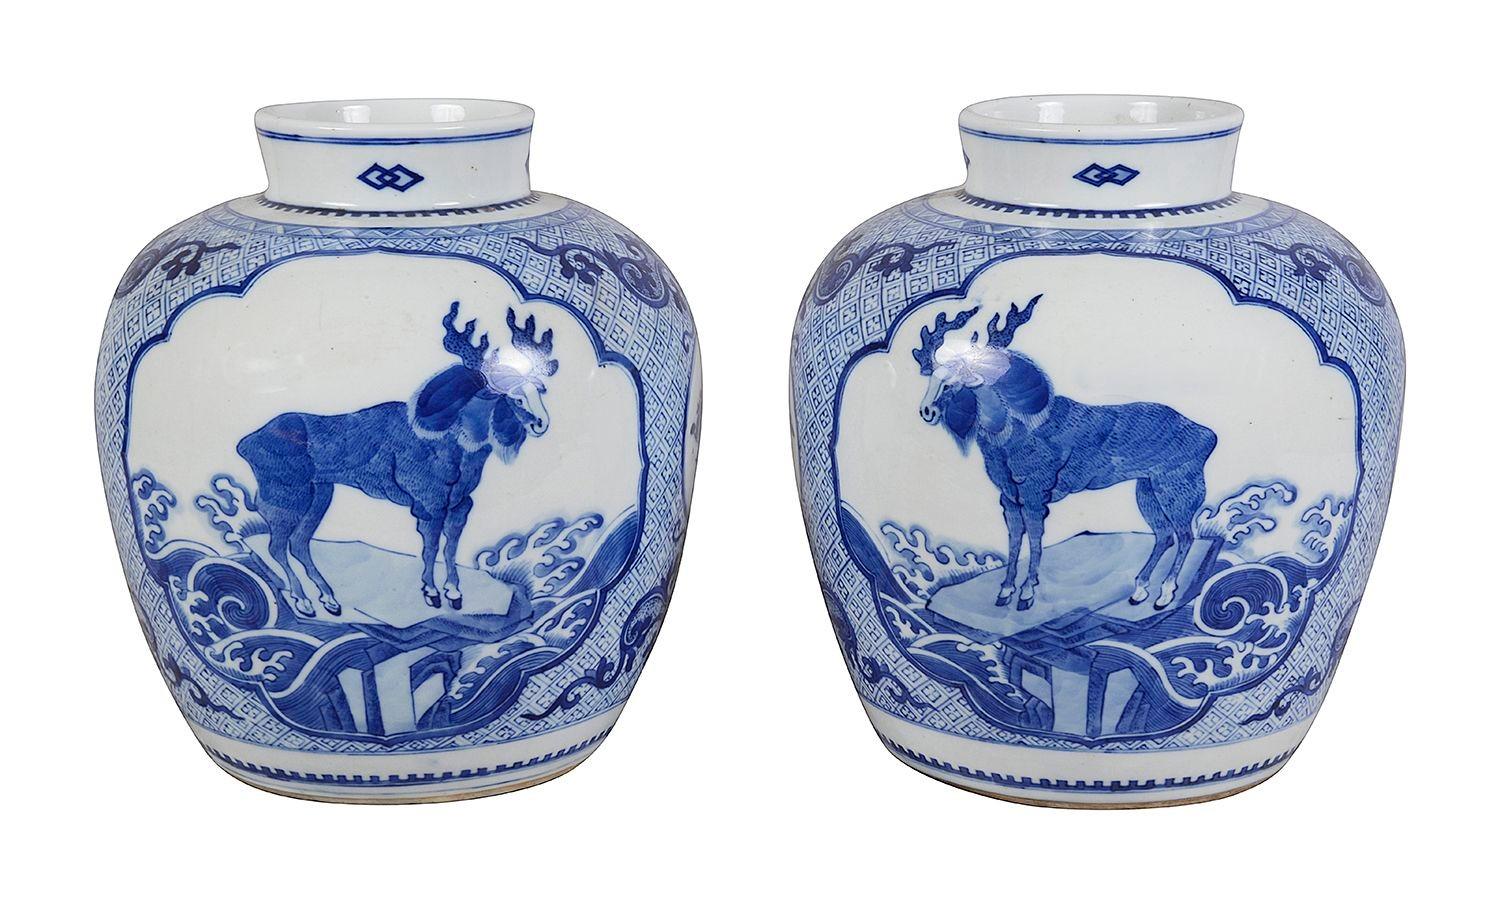 An unusual pair of late 19th Century Chinese blue and white ginger jar lamps. Each with hand painted motif decoration to the ground, inset hand painted scenes of moose and mythical winged creatures. Mounted on gilded bases.

Batch 77 G244/23 DNKZZ